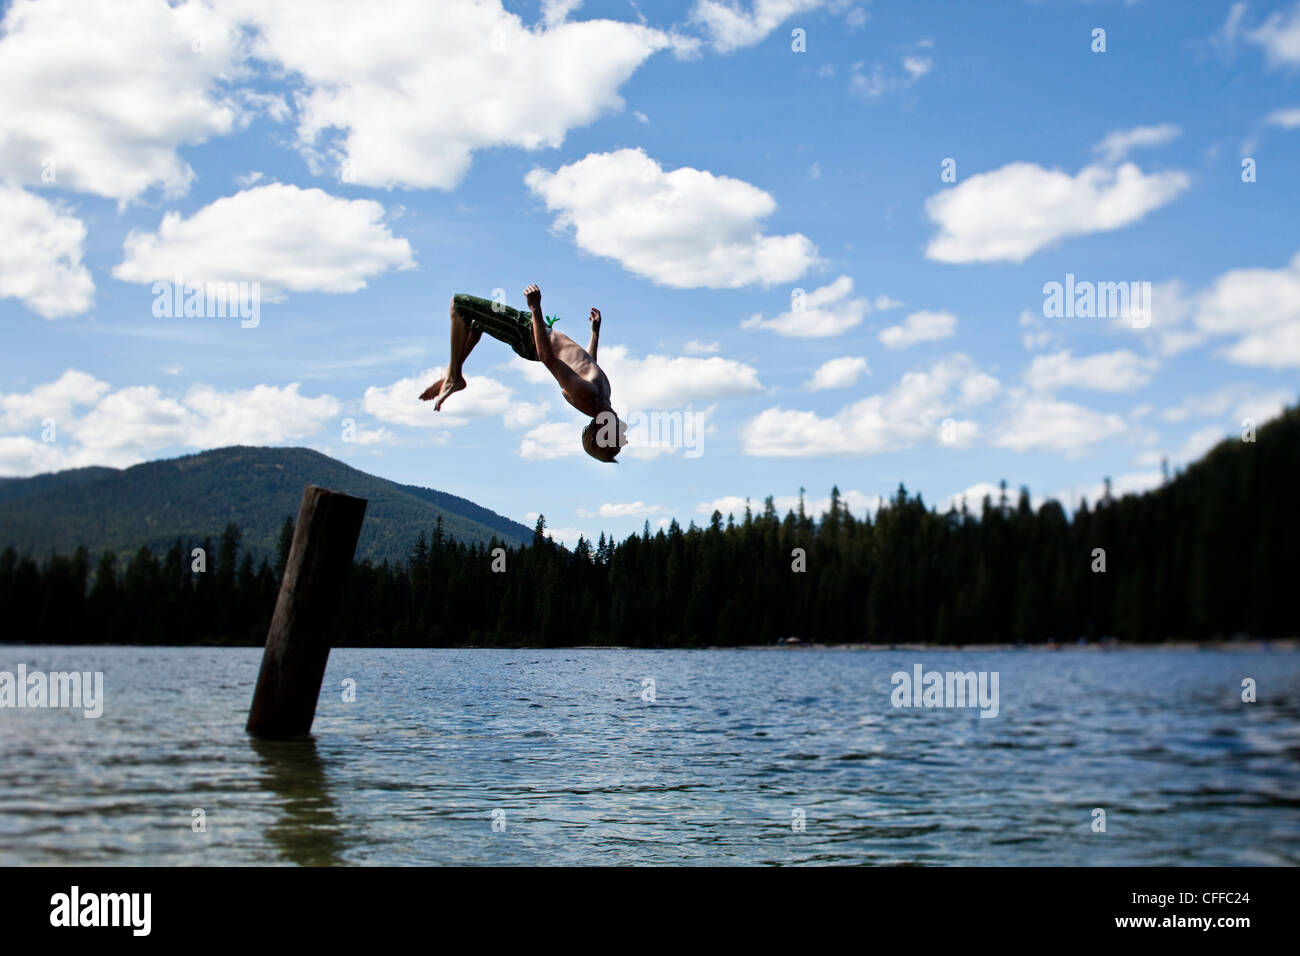 A young man backflipping off a pier at a lake in Idaho. Stock Photo